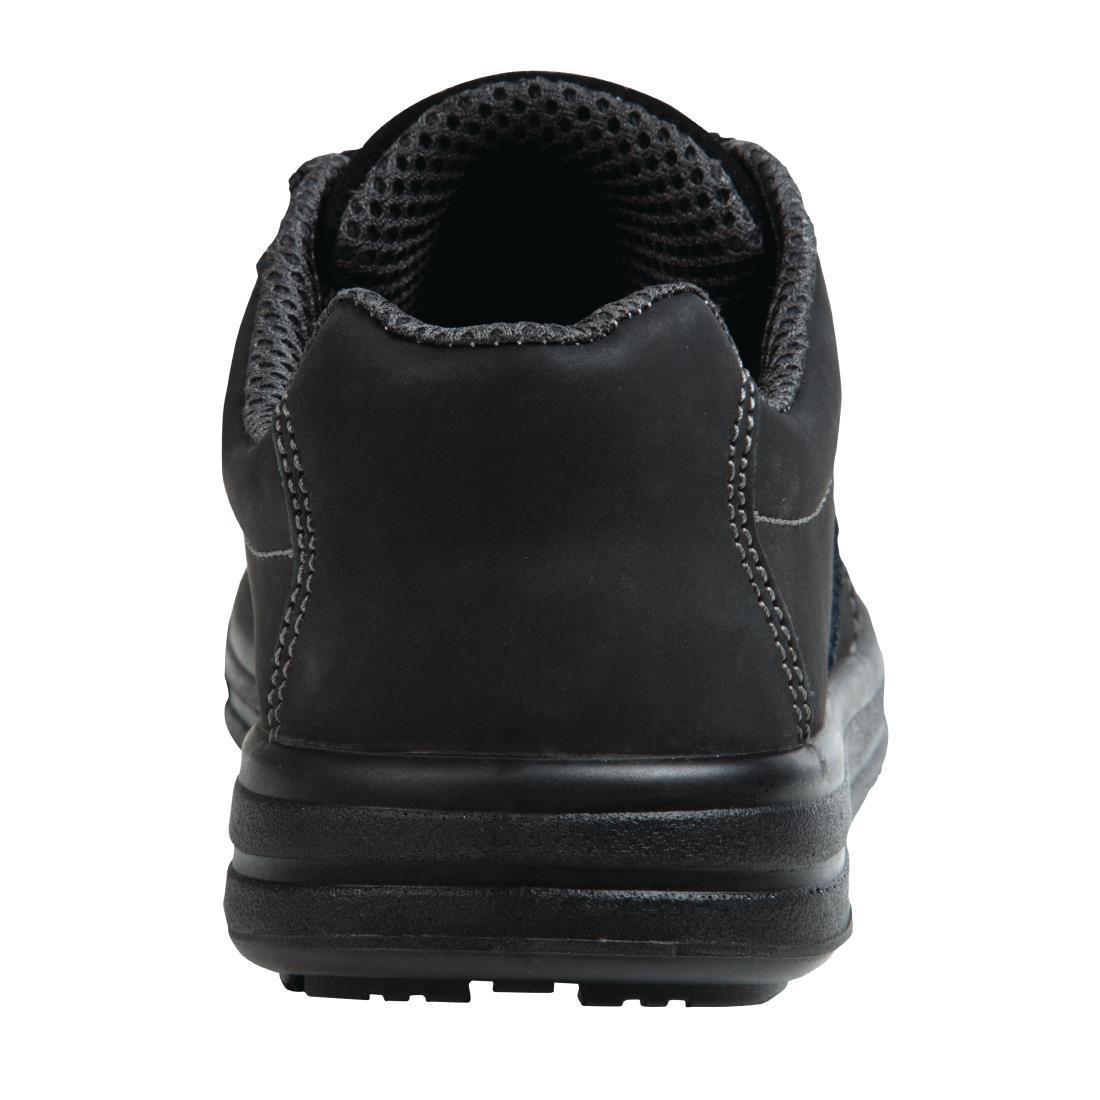 Slipbuster Safety Trainers Black 40 - BB420-40  - 4